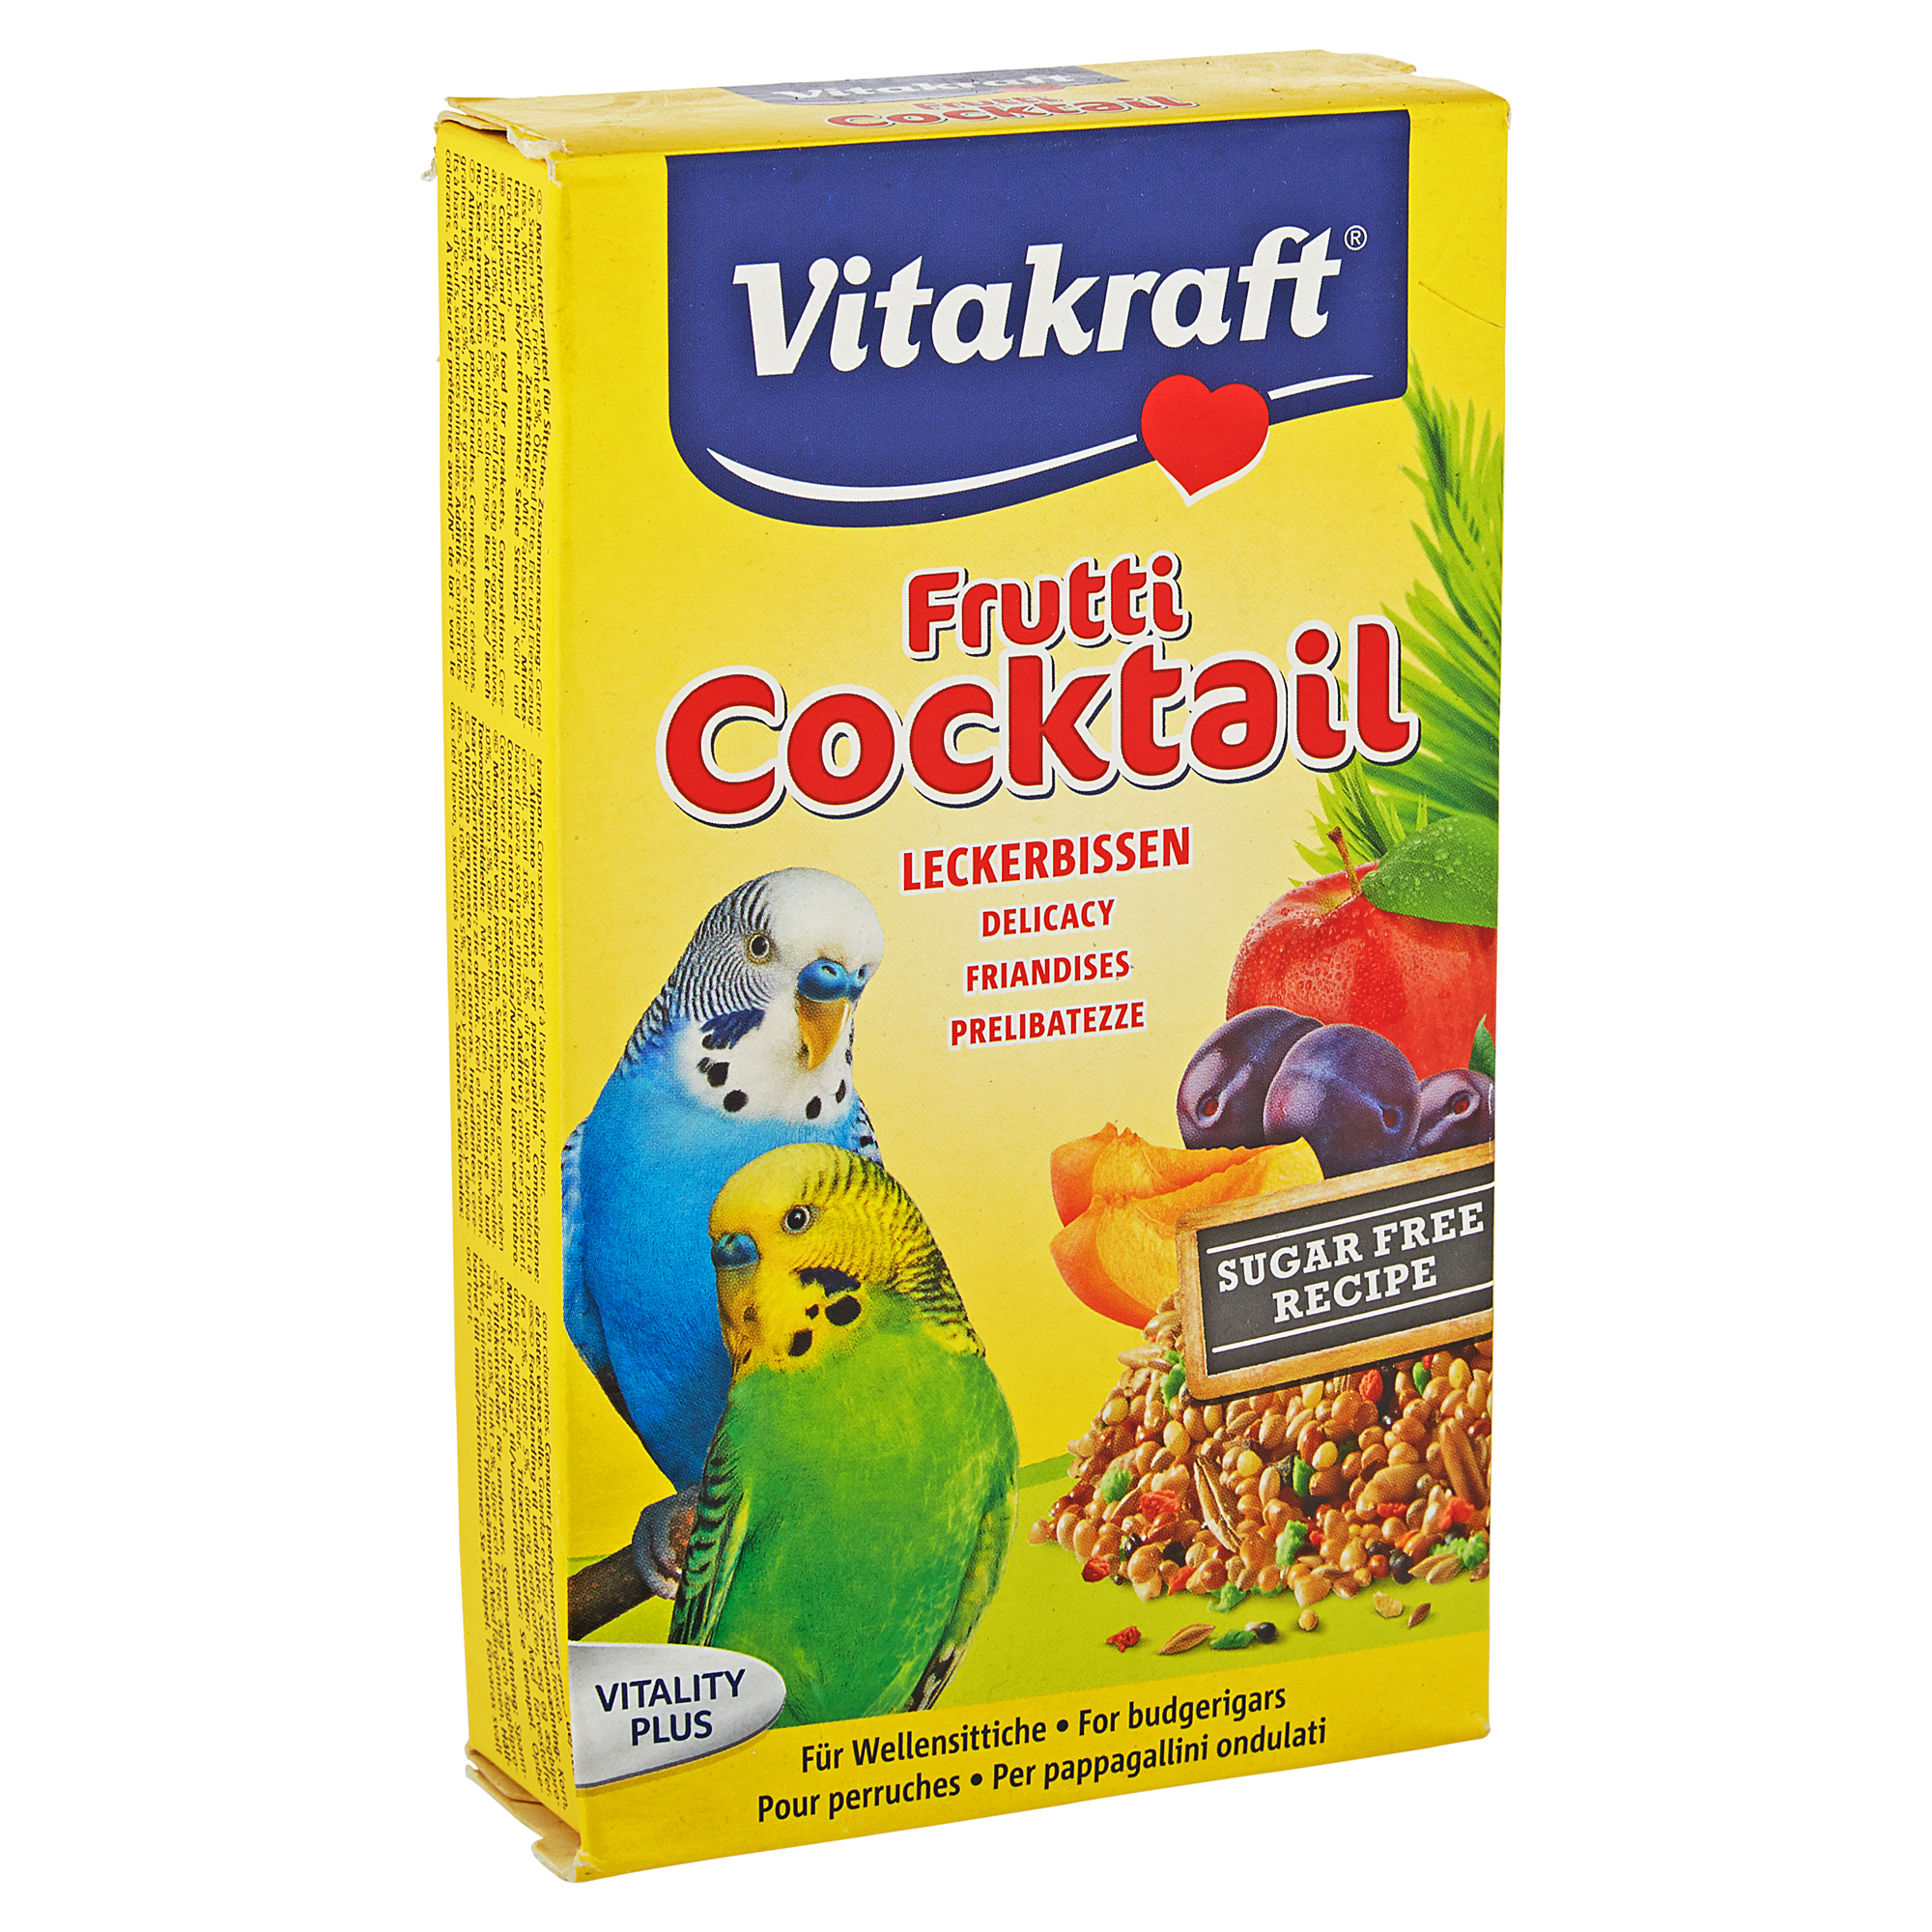 Fruchtcocktail "Vitality Plus" 200 g Wellensittiche + product picture